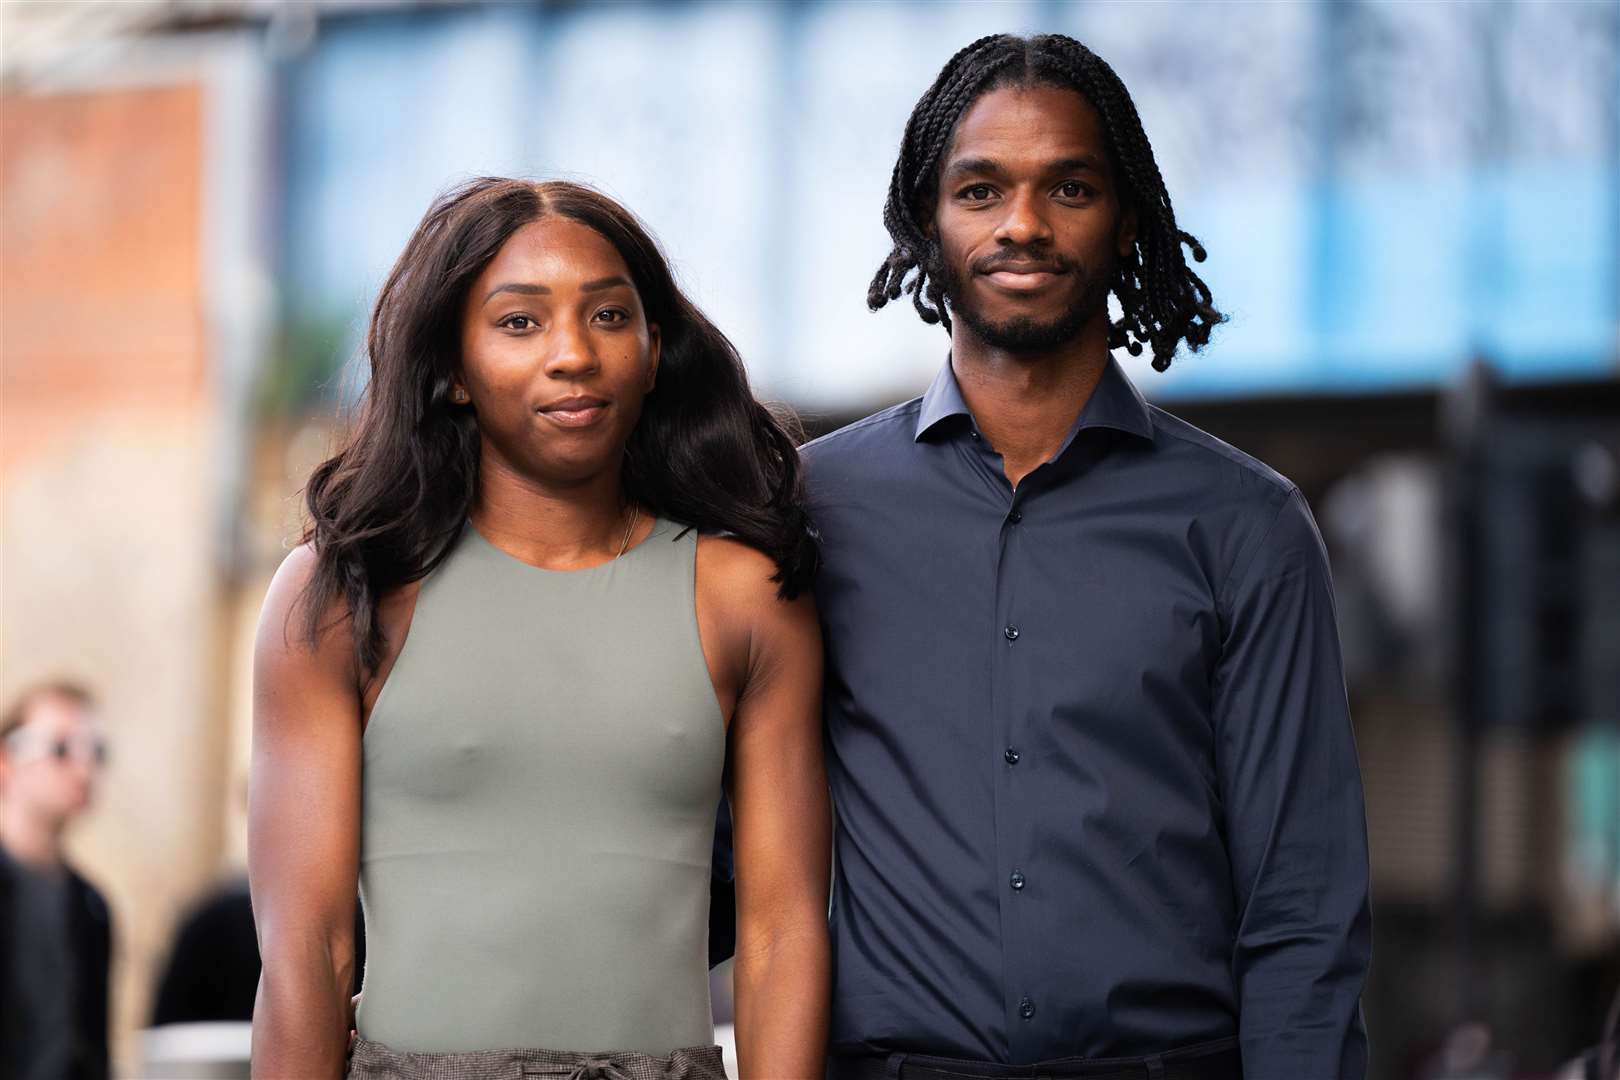 Bianca Williams and Ricardo Dos Santos claimed they were racially profiled in a stop and search in 2020 (James Manning/PA)